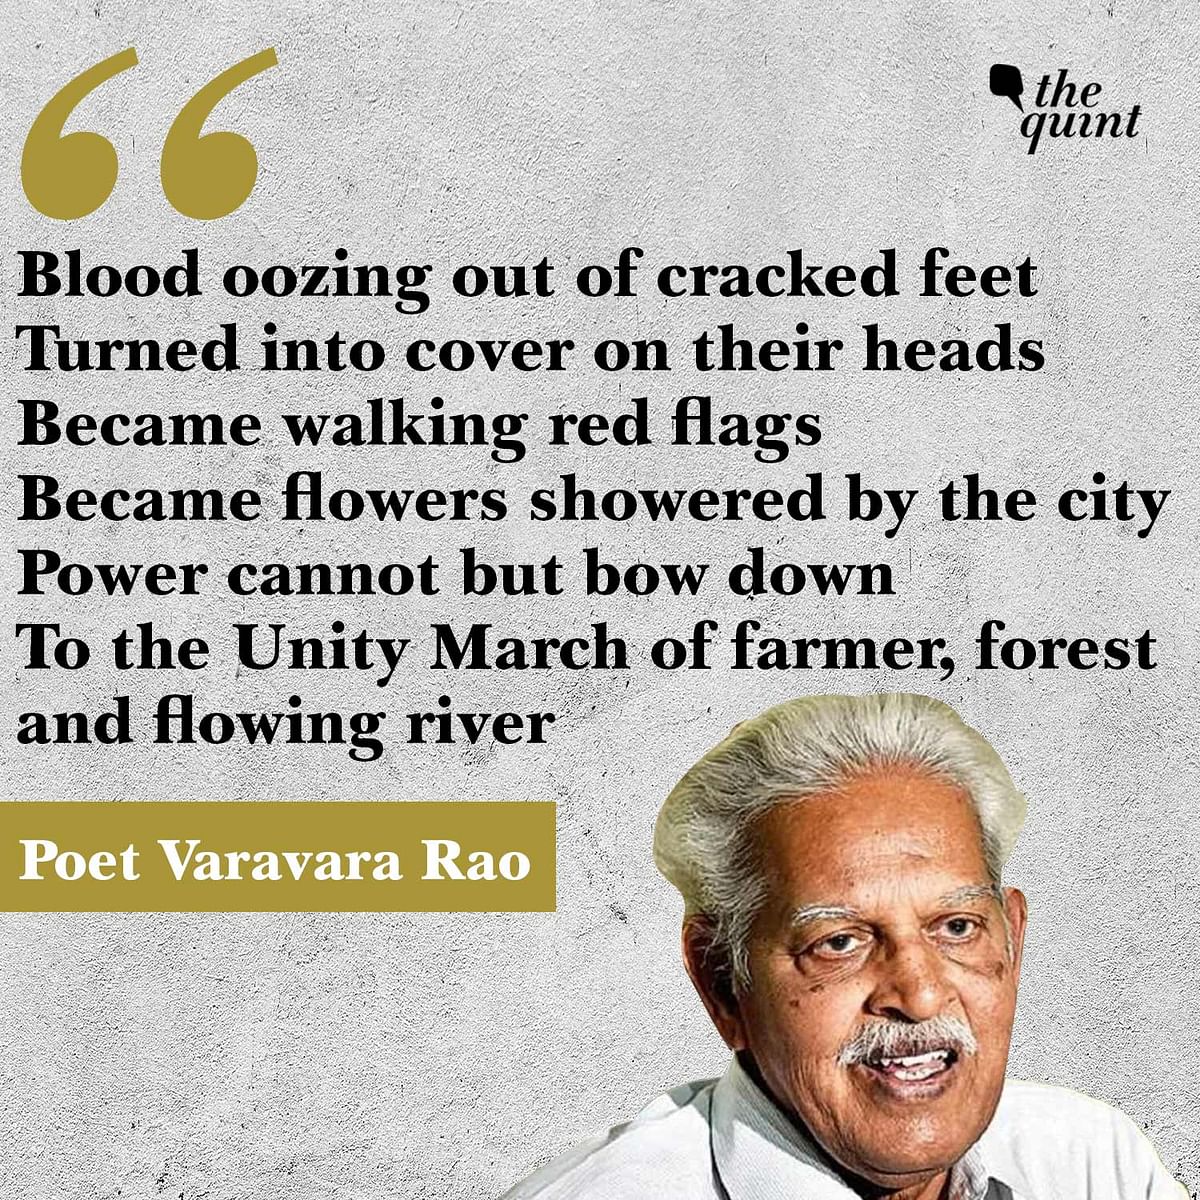 References to 'revolution,' saffronisation' and 'Ayodhya' in poet Varavara Rao's poems were flagged by Penguin.